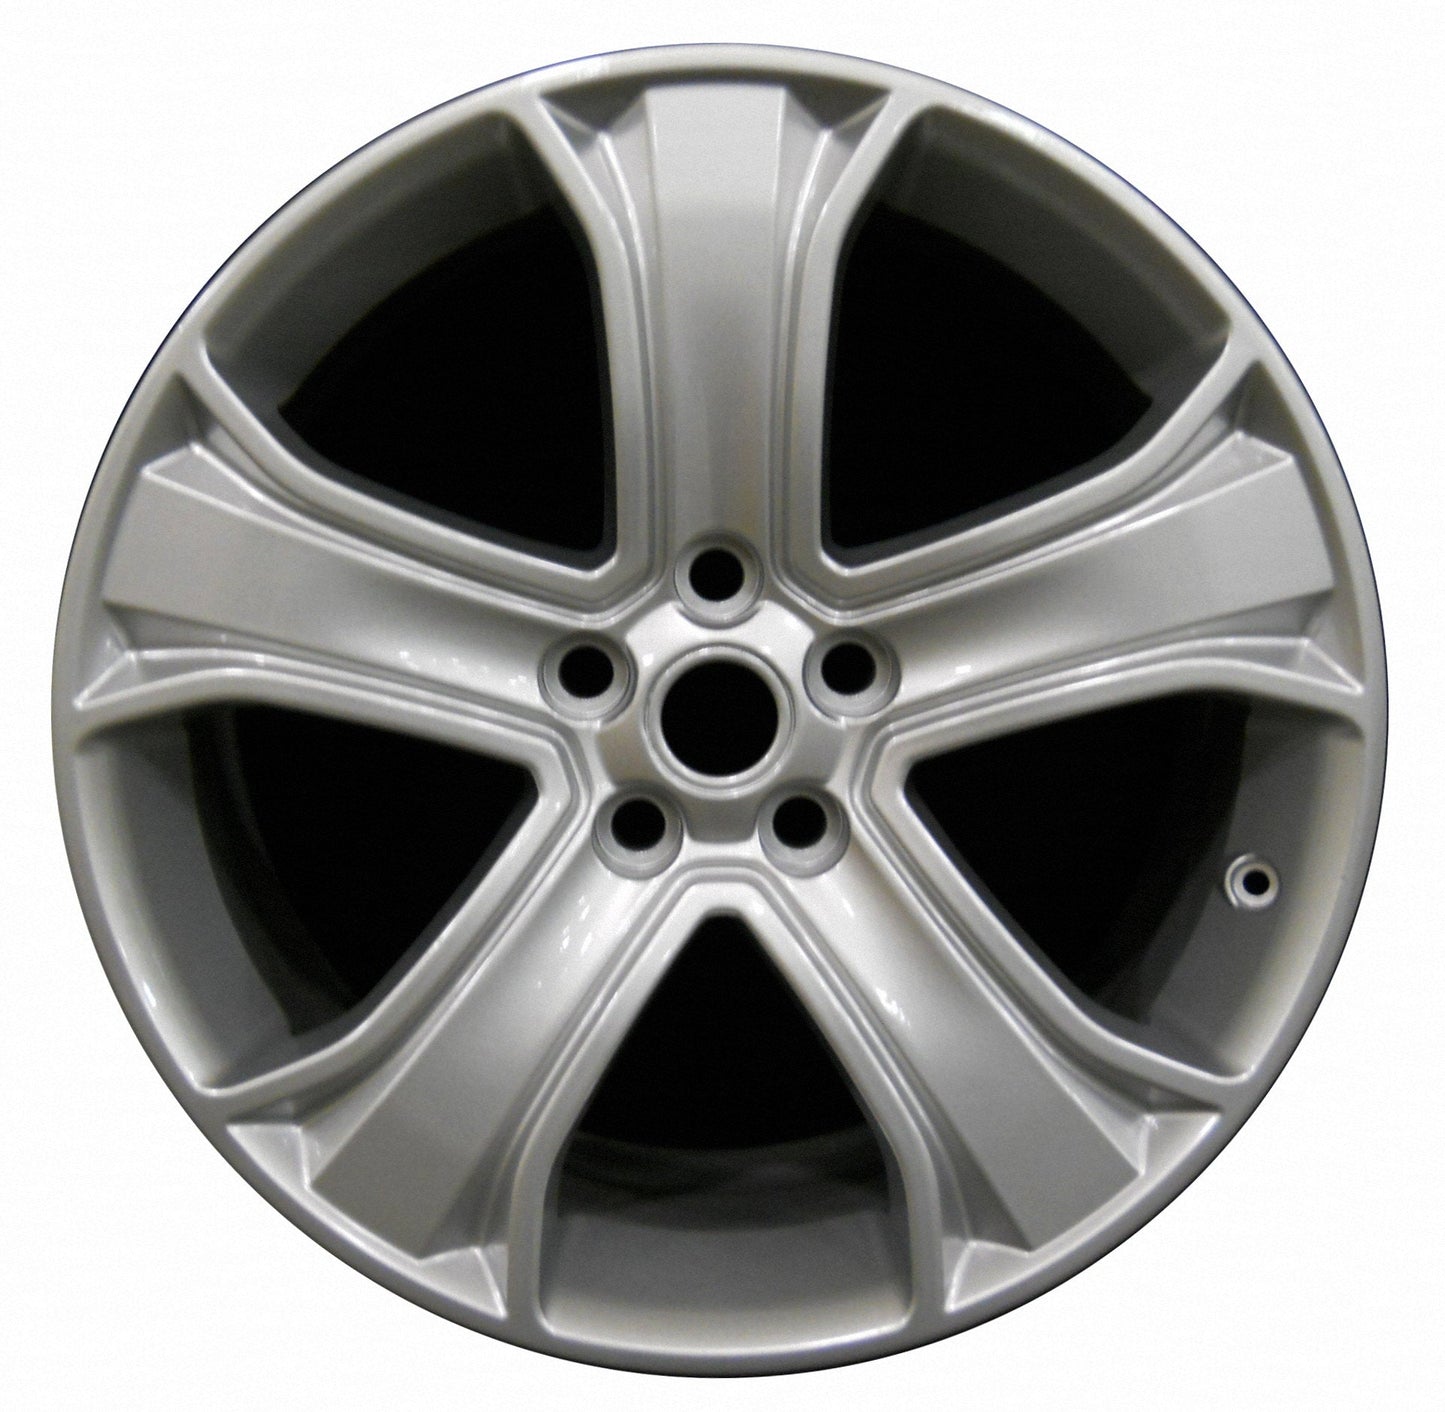 Land Rover Range Rover Sport  2010, 2011, 2012, 2013 Factory OEM Car Wheel Size 20x9.5 Alloy WAO.72221.LS04.FF